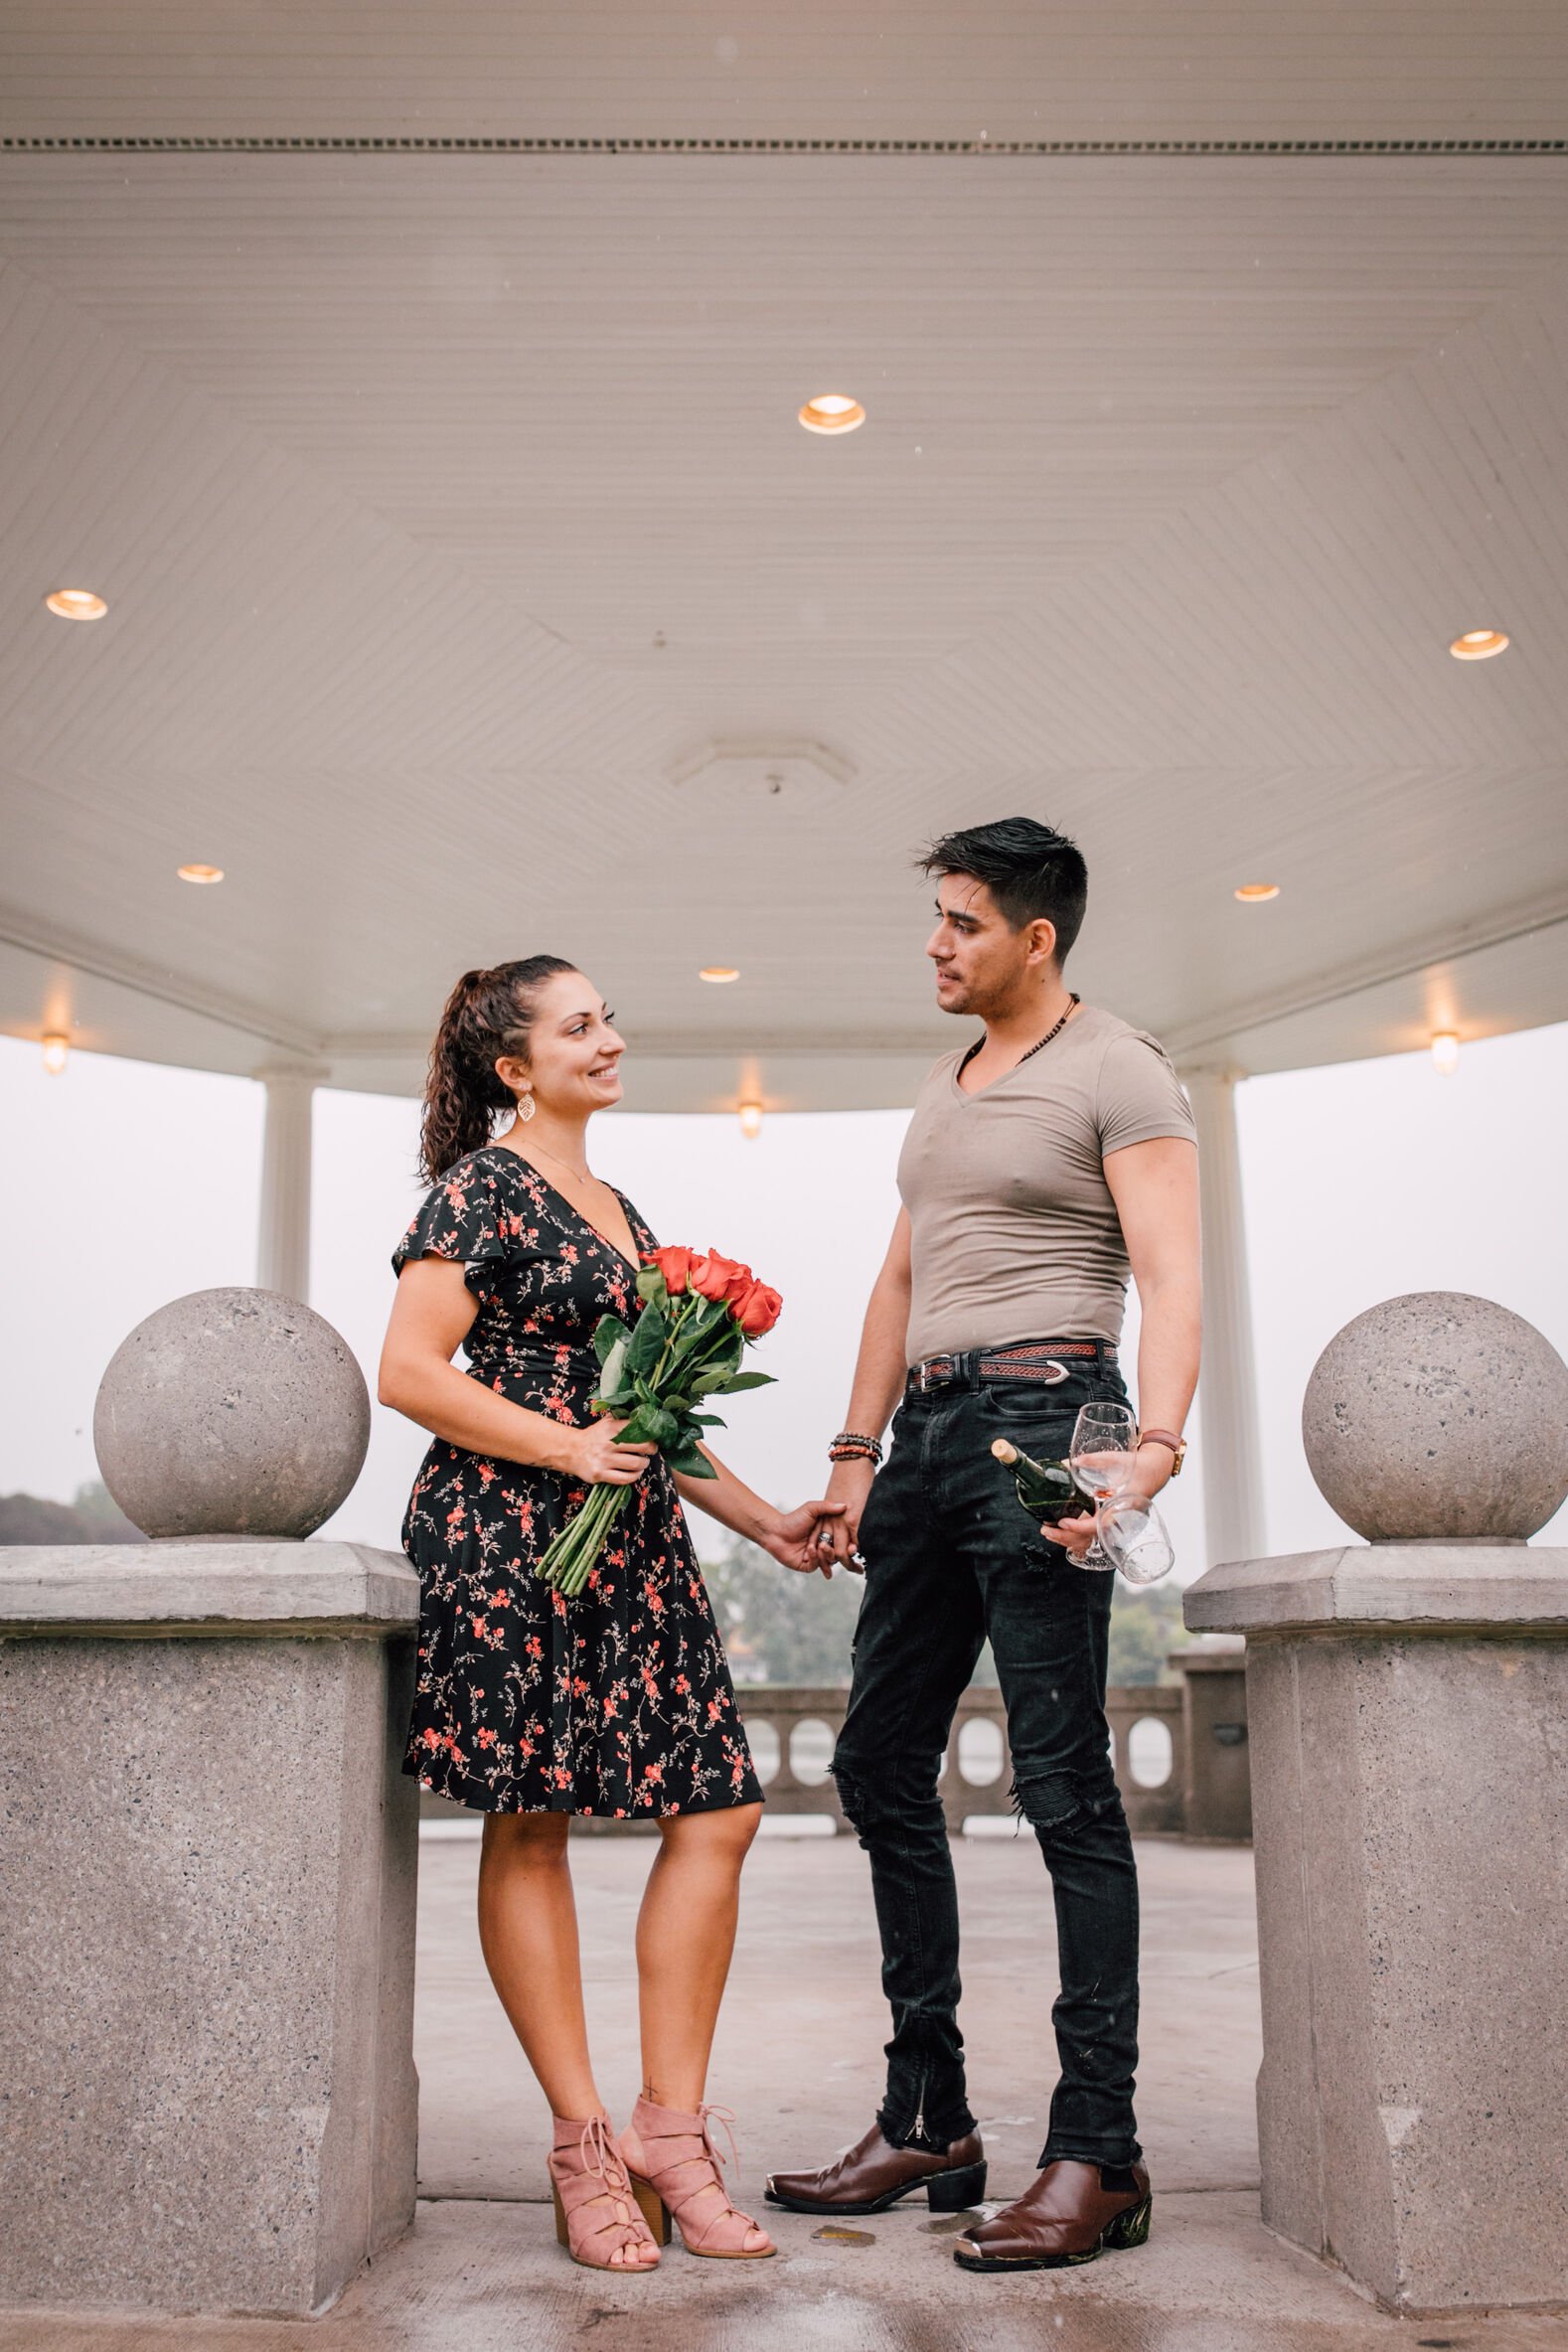  pablo and jessica hold hands while he holds a wine bottle and two glasses and she holds a bouquet of roses during their engagement photos in the rain 